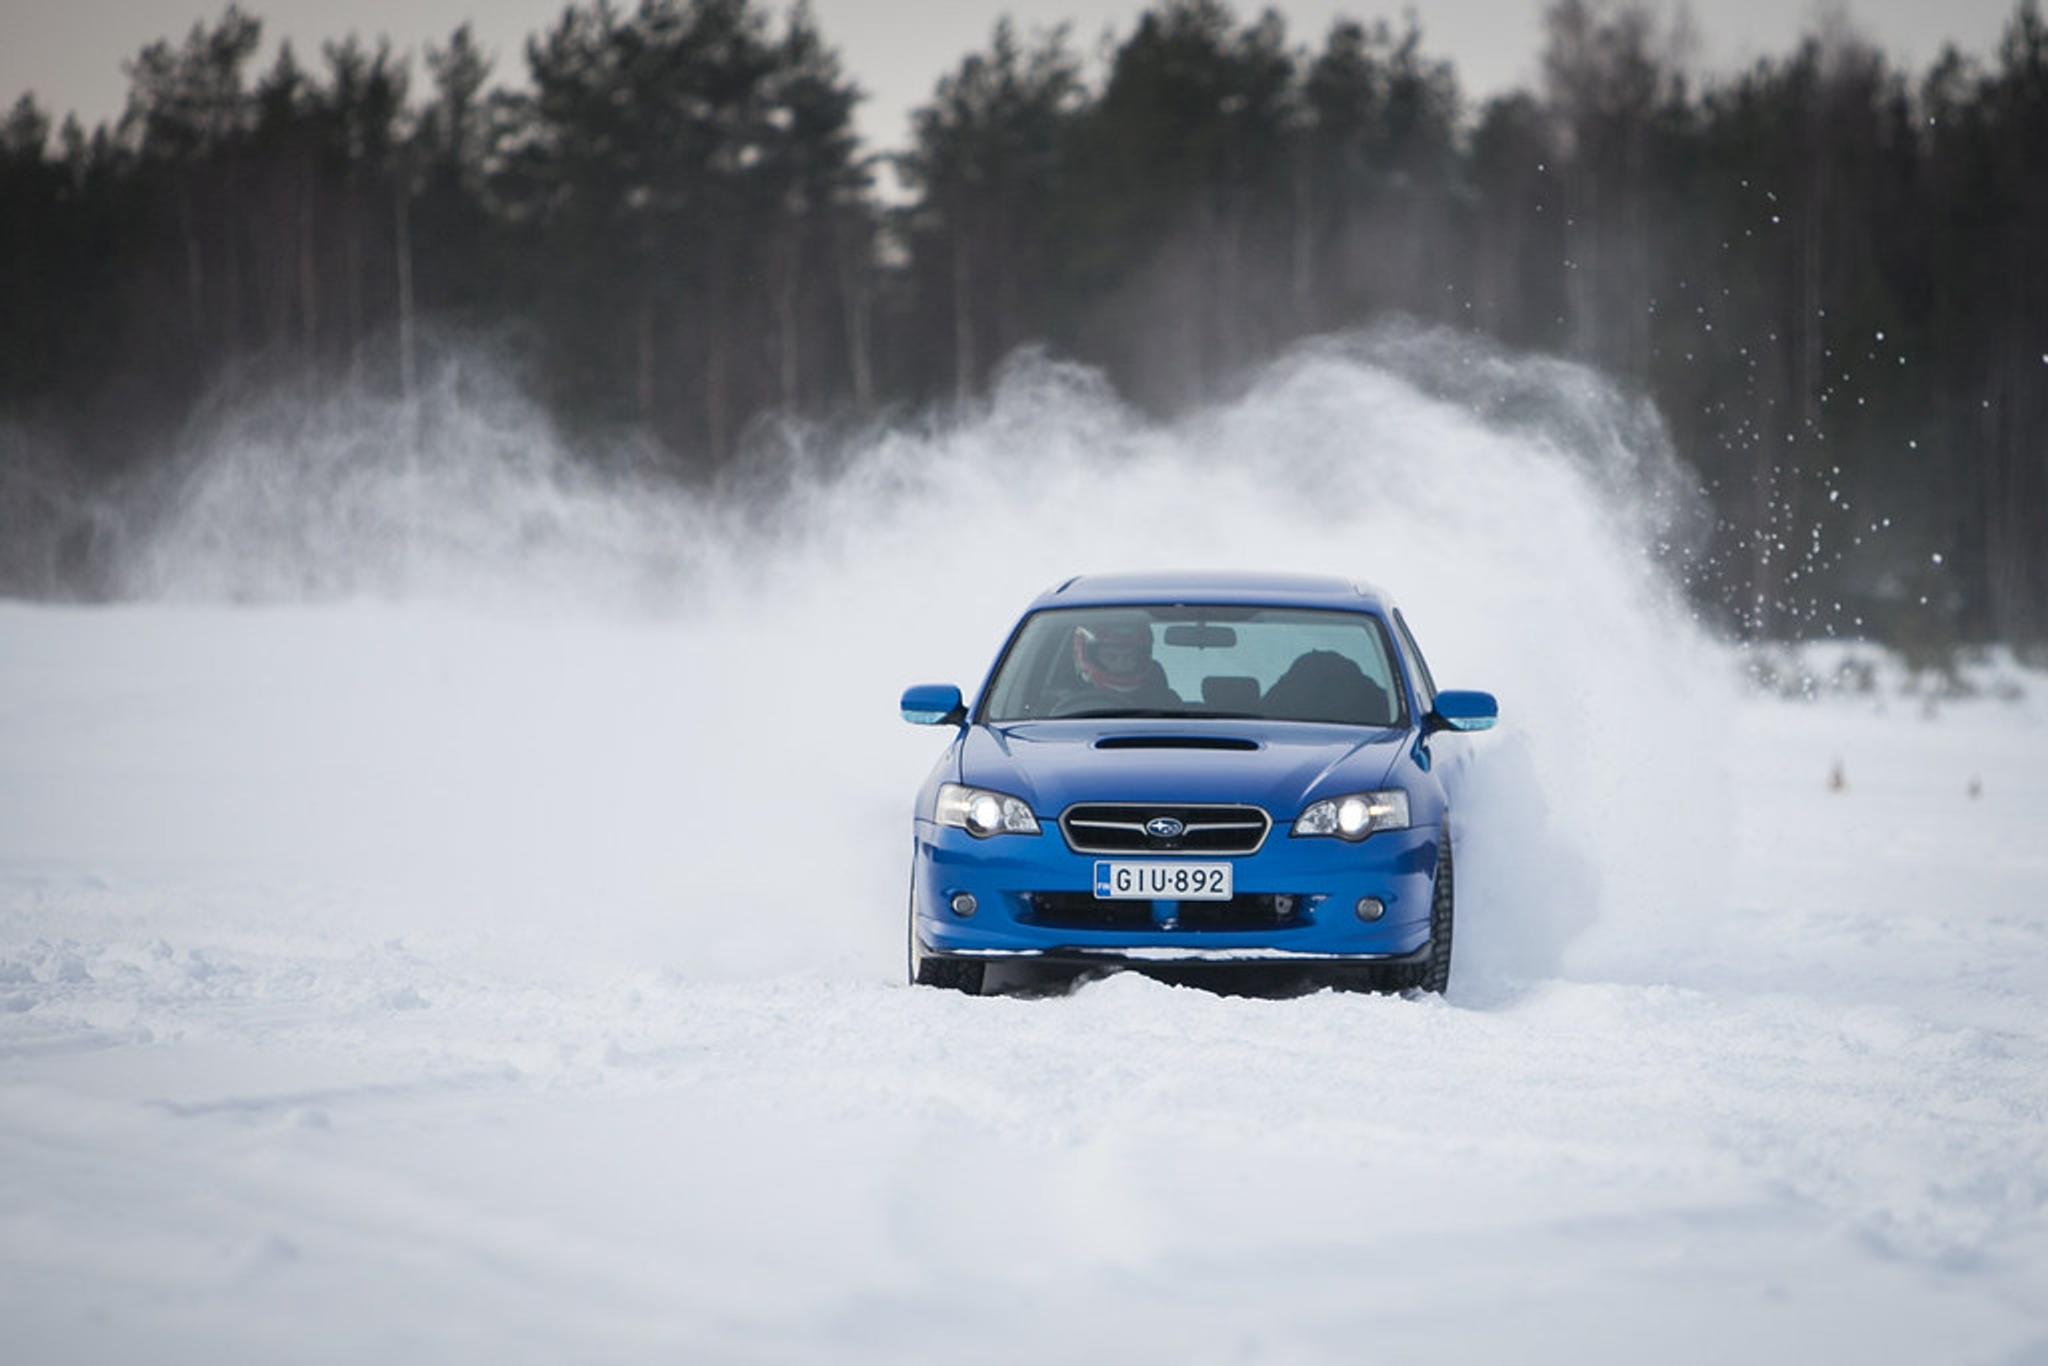 drifting in snow, blue subaru, driving in snow, slippery road, 